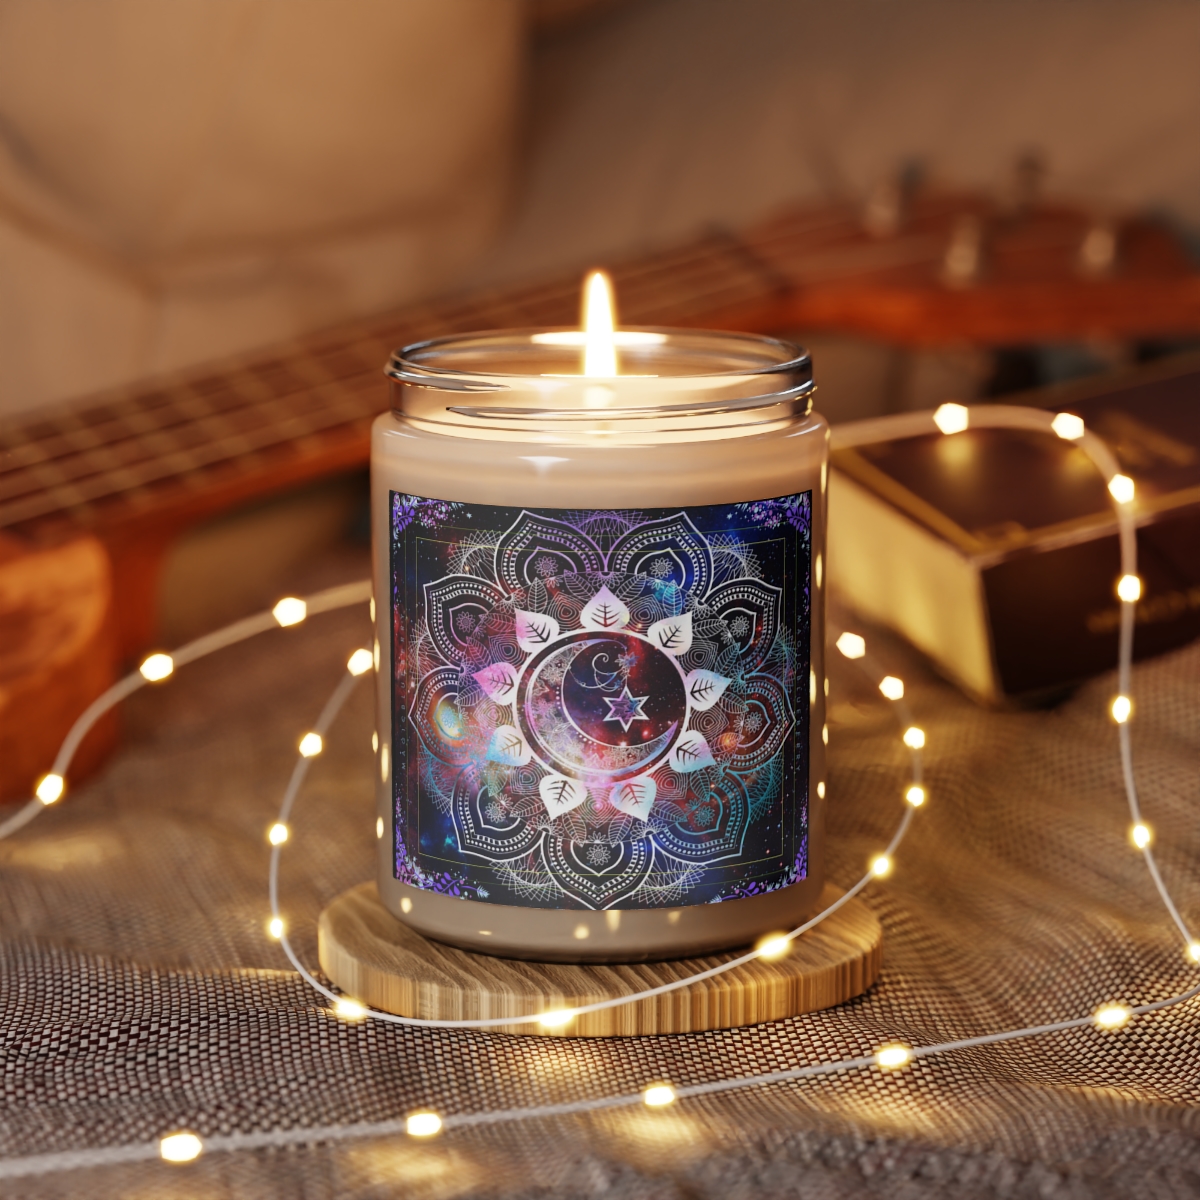 Mandala Moon Magic Spell - Scented Soy Wax Candle | Moon Candle | Manifestation Spell Candle Jar | Coconut Soy Candle 9oz | Aromatherapy product main image